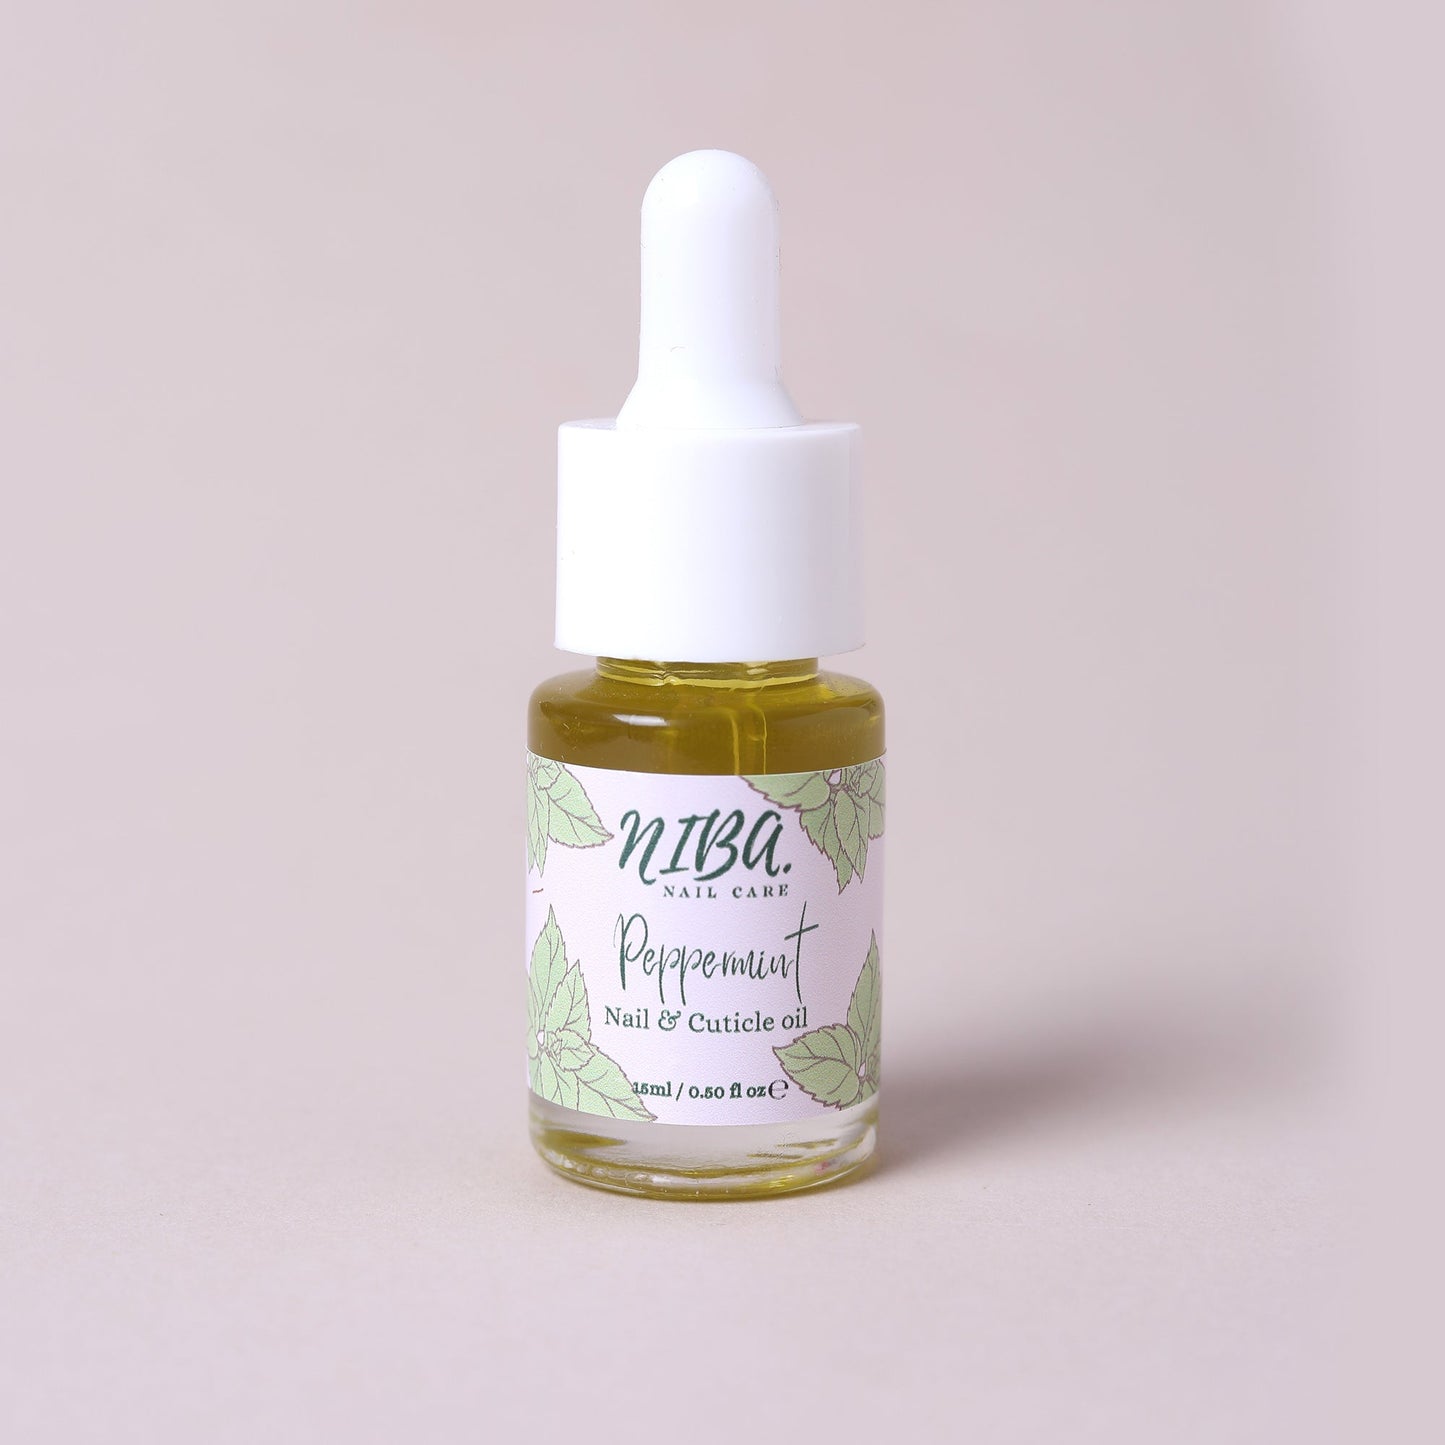 NIBA X Nail & Cuticle oil 15ml Dropper bottle - Our Products, Your Branding! (Trade)